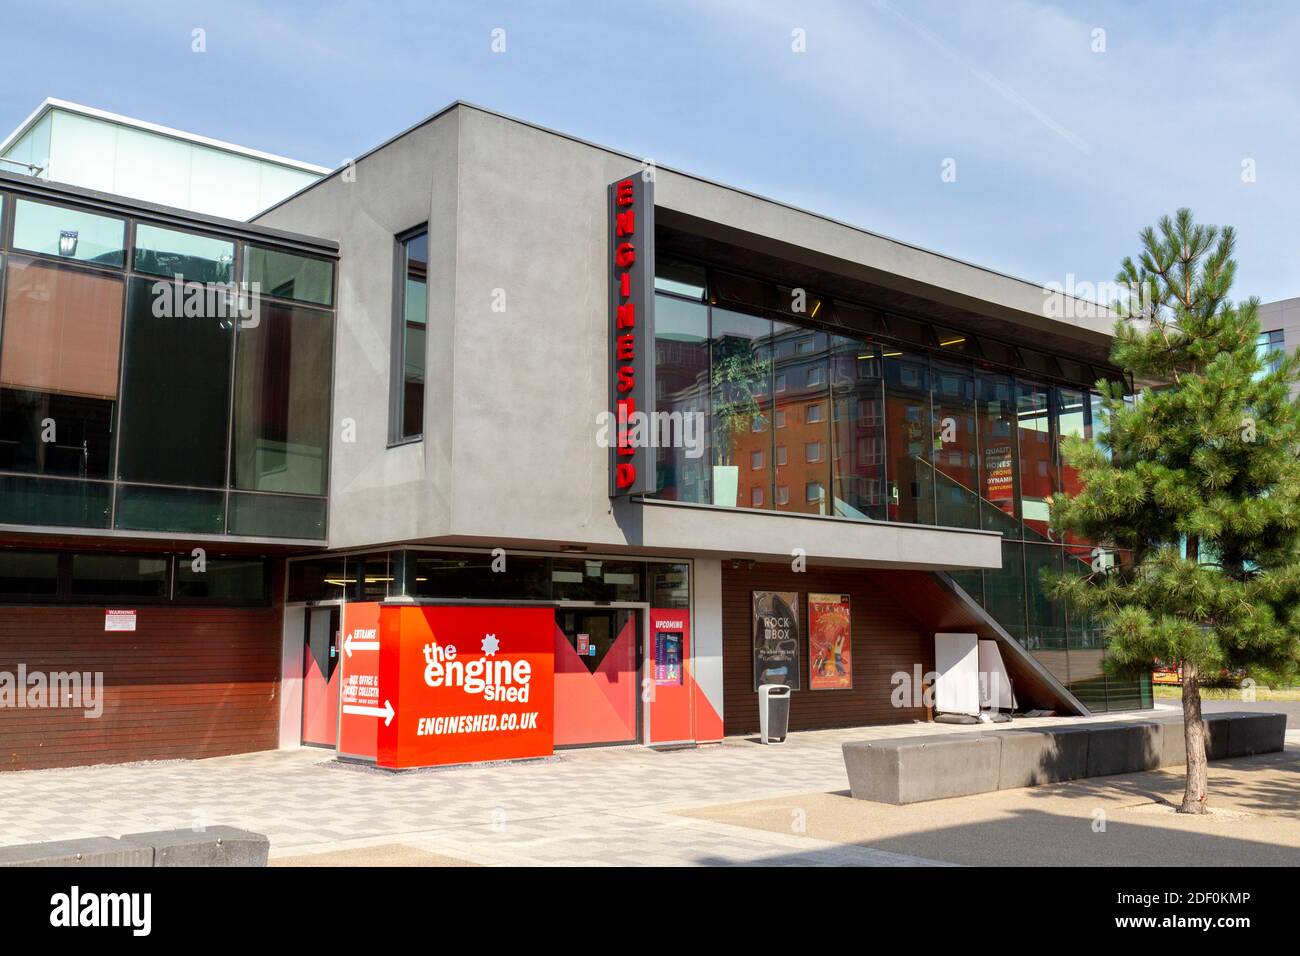 The Engine Shed, Students Union Building, Lincoln University, Brayford Pool, Lincoln, Lincolnshire, Royaume-Uni. Banque D'Images